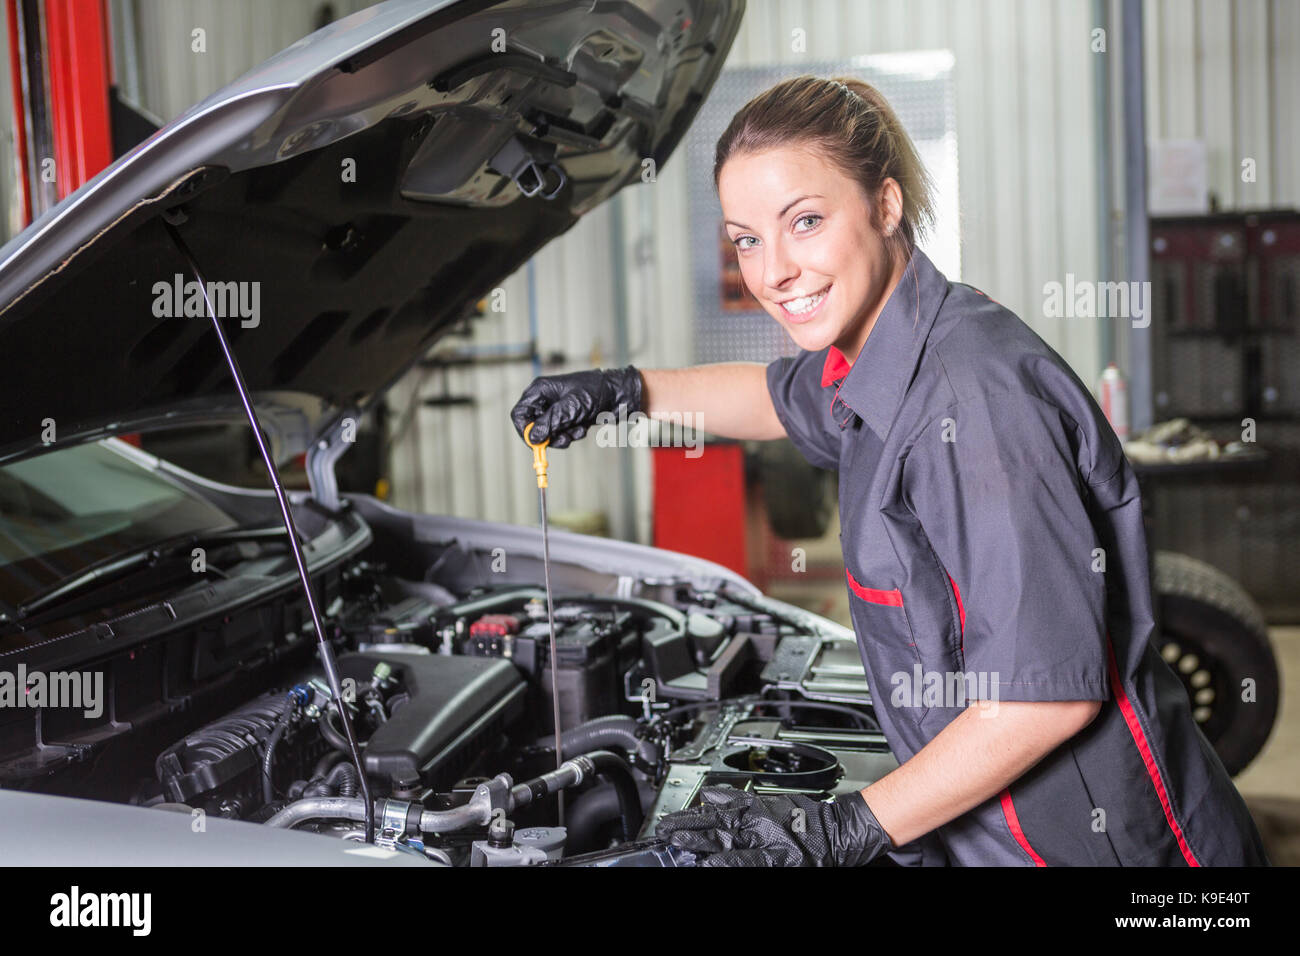 A Mechanic woman working on car in his shop Stock Photo - Alamy